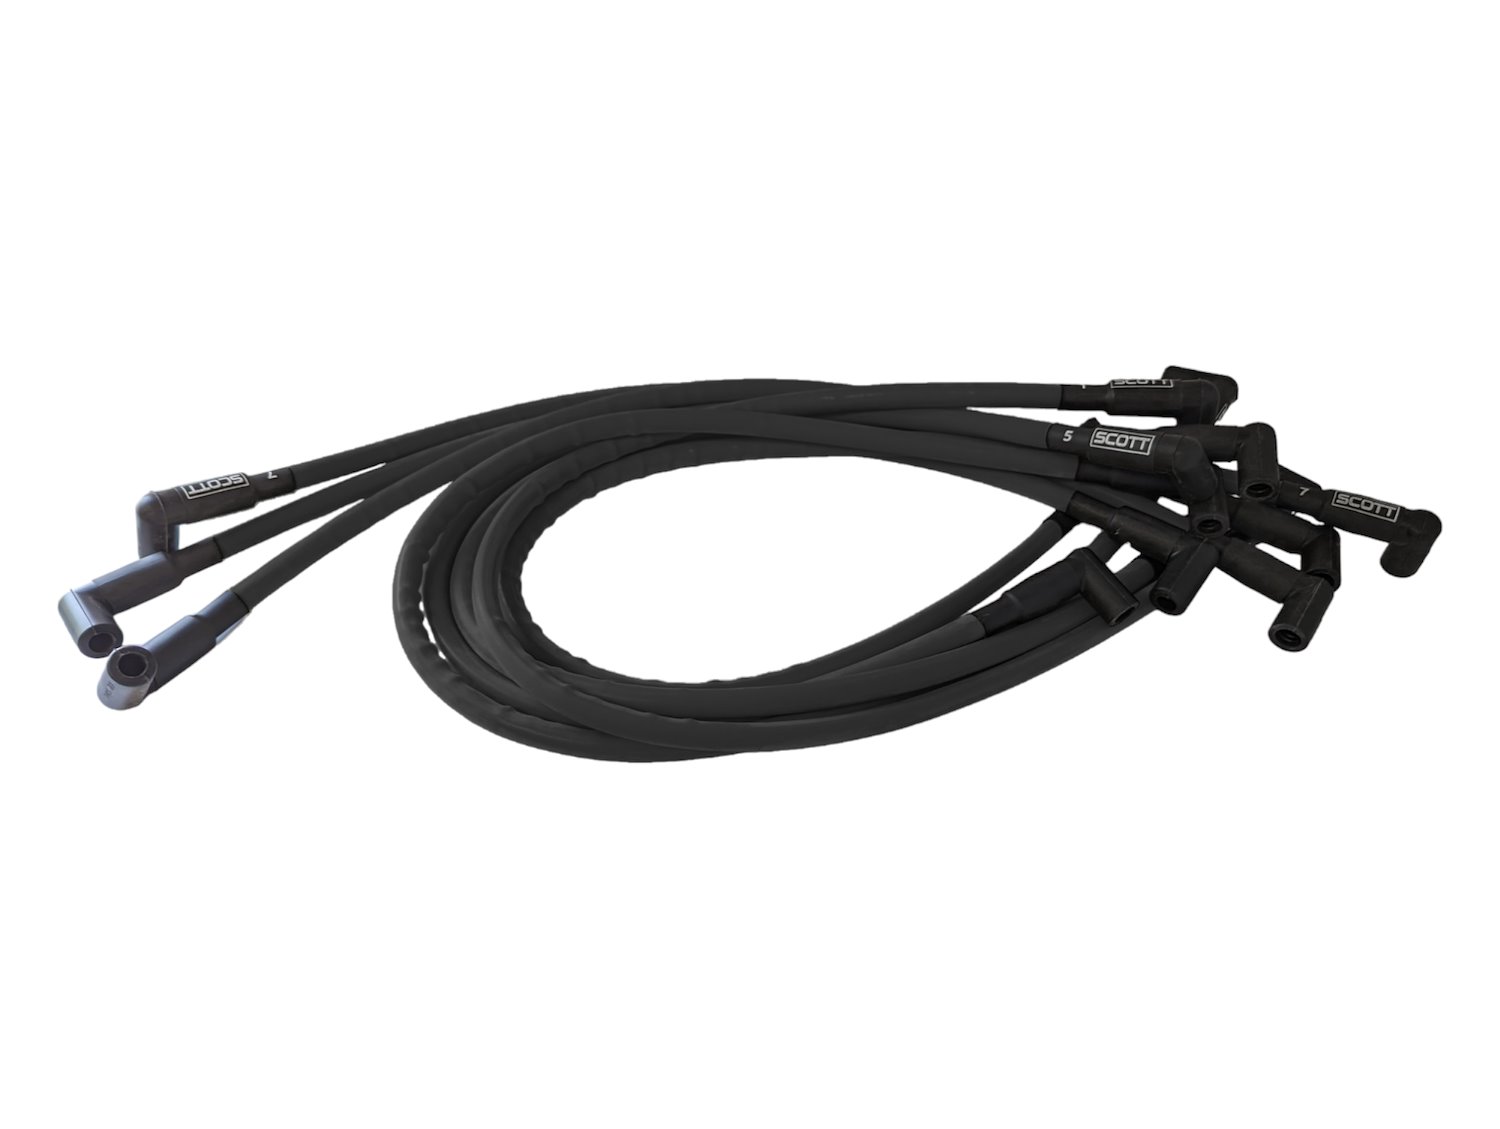 SPW-CH-437-1 High-Performance Silicone-Sleeved Spark Plug Wire Set for Small Block Chevy, Over & Under [Black]